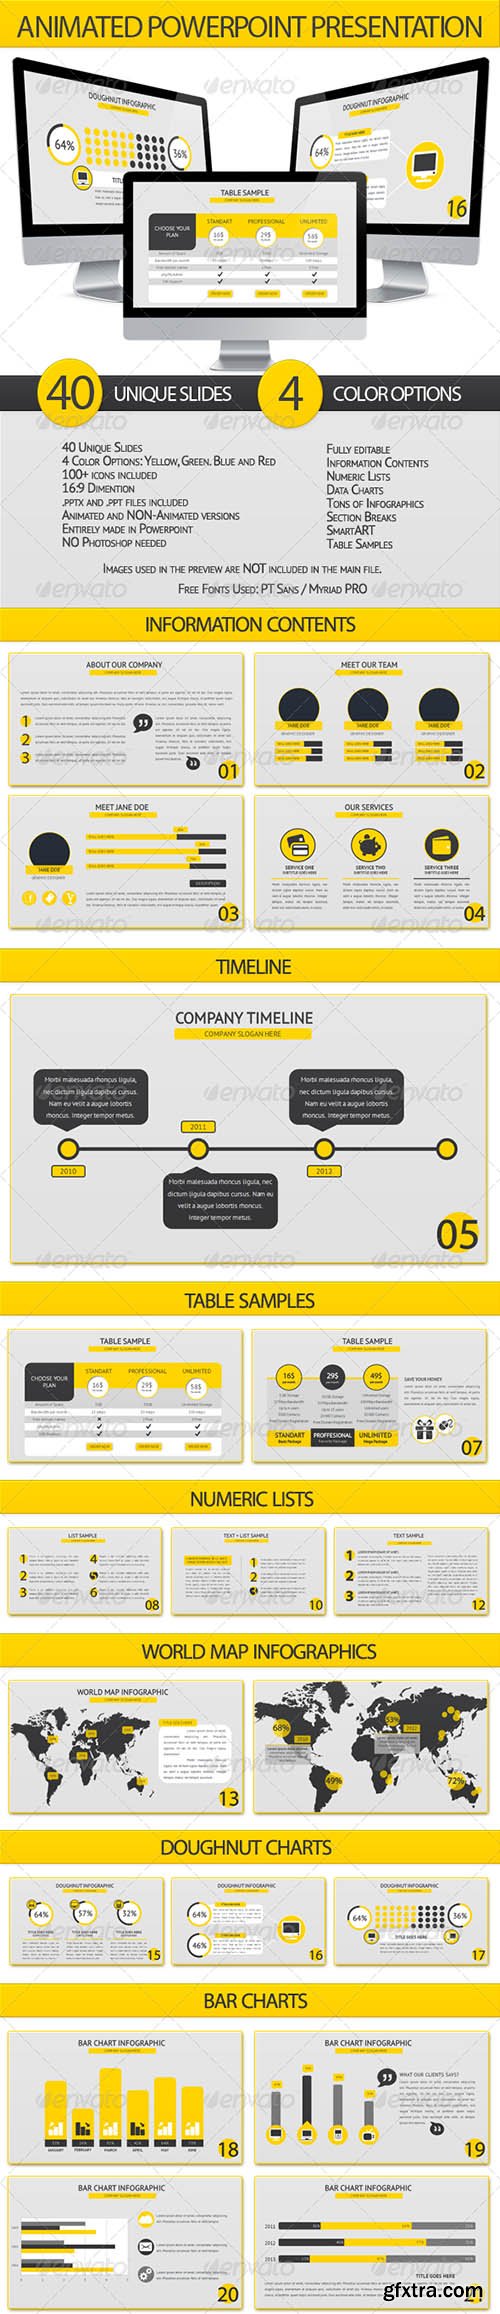 Graphicriver - Animated Powerpoint Presentation 6325669